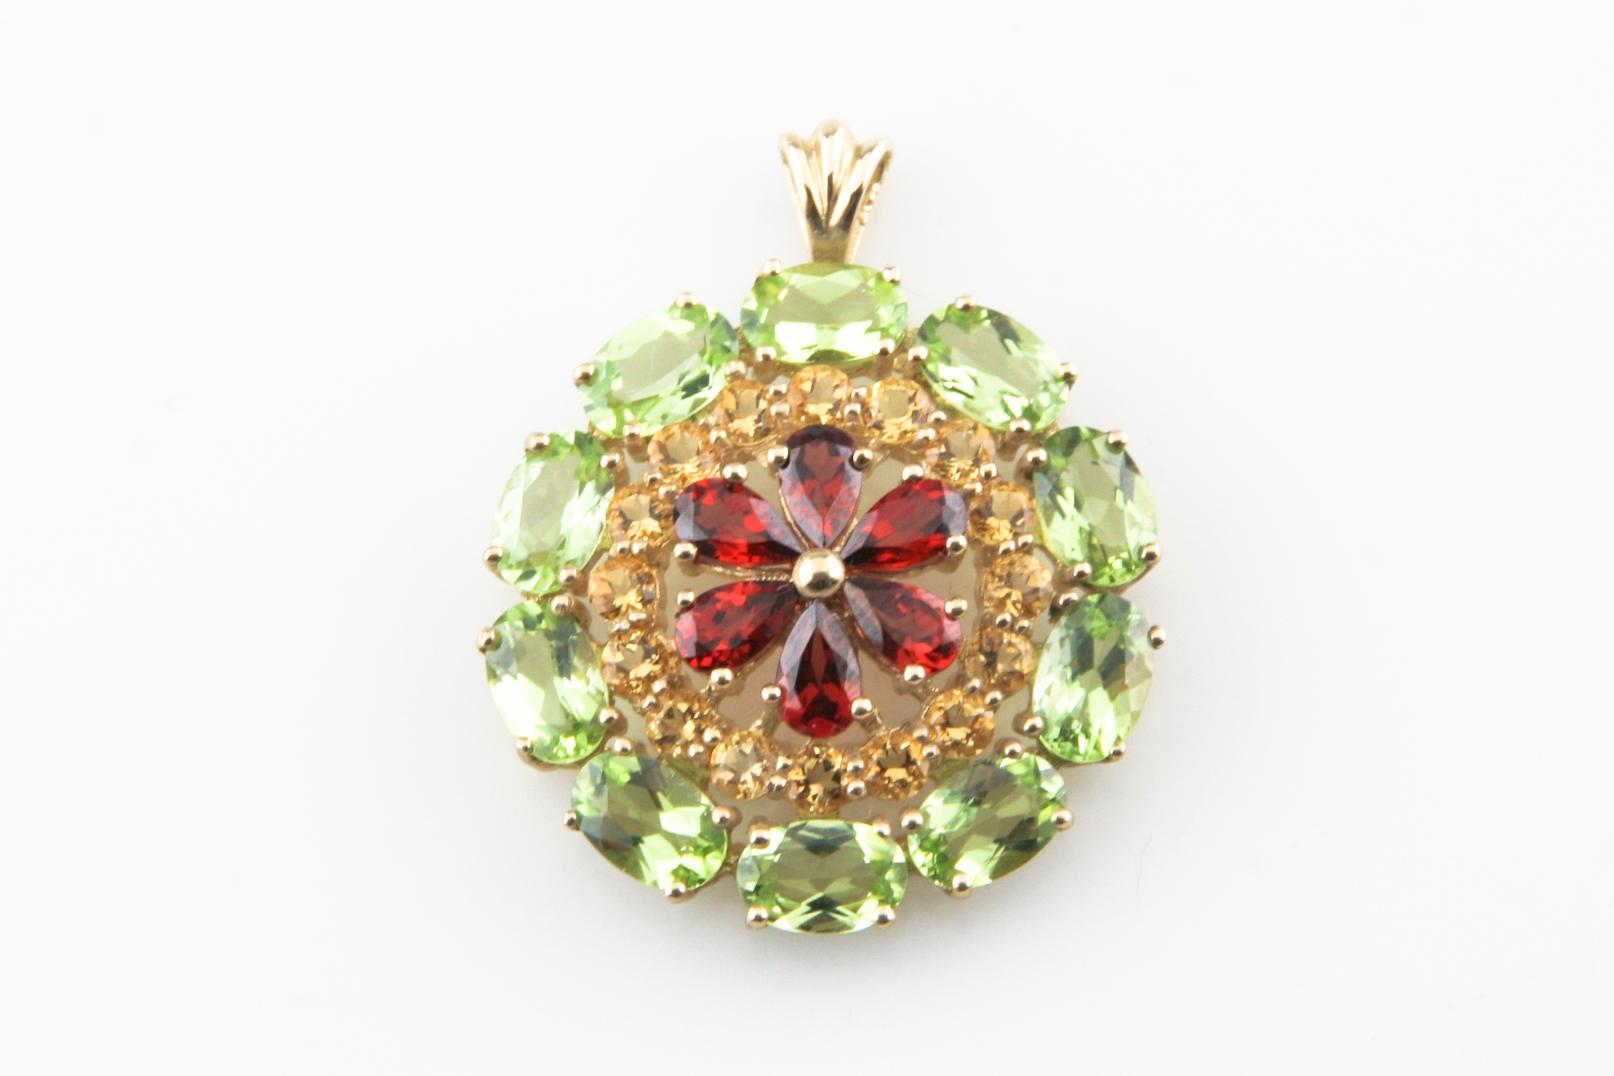 One electronically tested 10KT yellow gold ladies cast multi-gemstone pendant with a bright polish finish.
Condition is good.
Ladies 10KT Yellow Gold Multi-Gemstone Floral Design Pendant
The pendant features garnets in a stylized floral pattern set